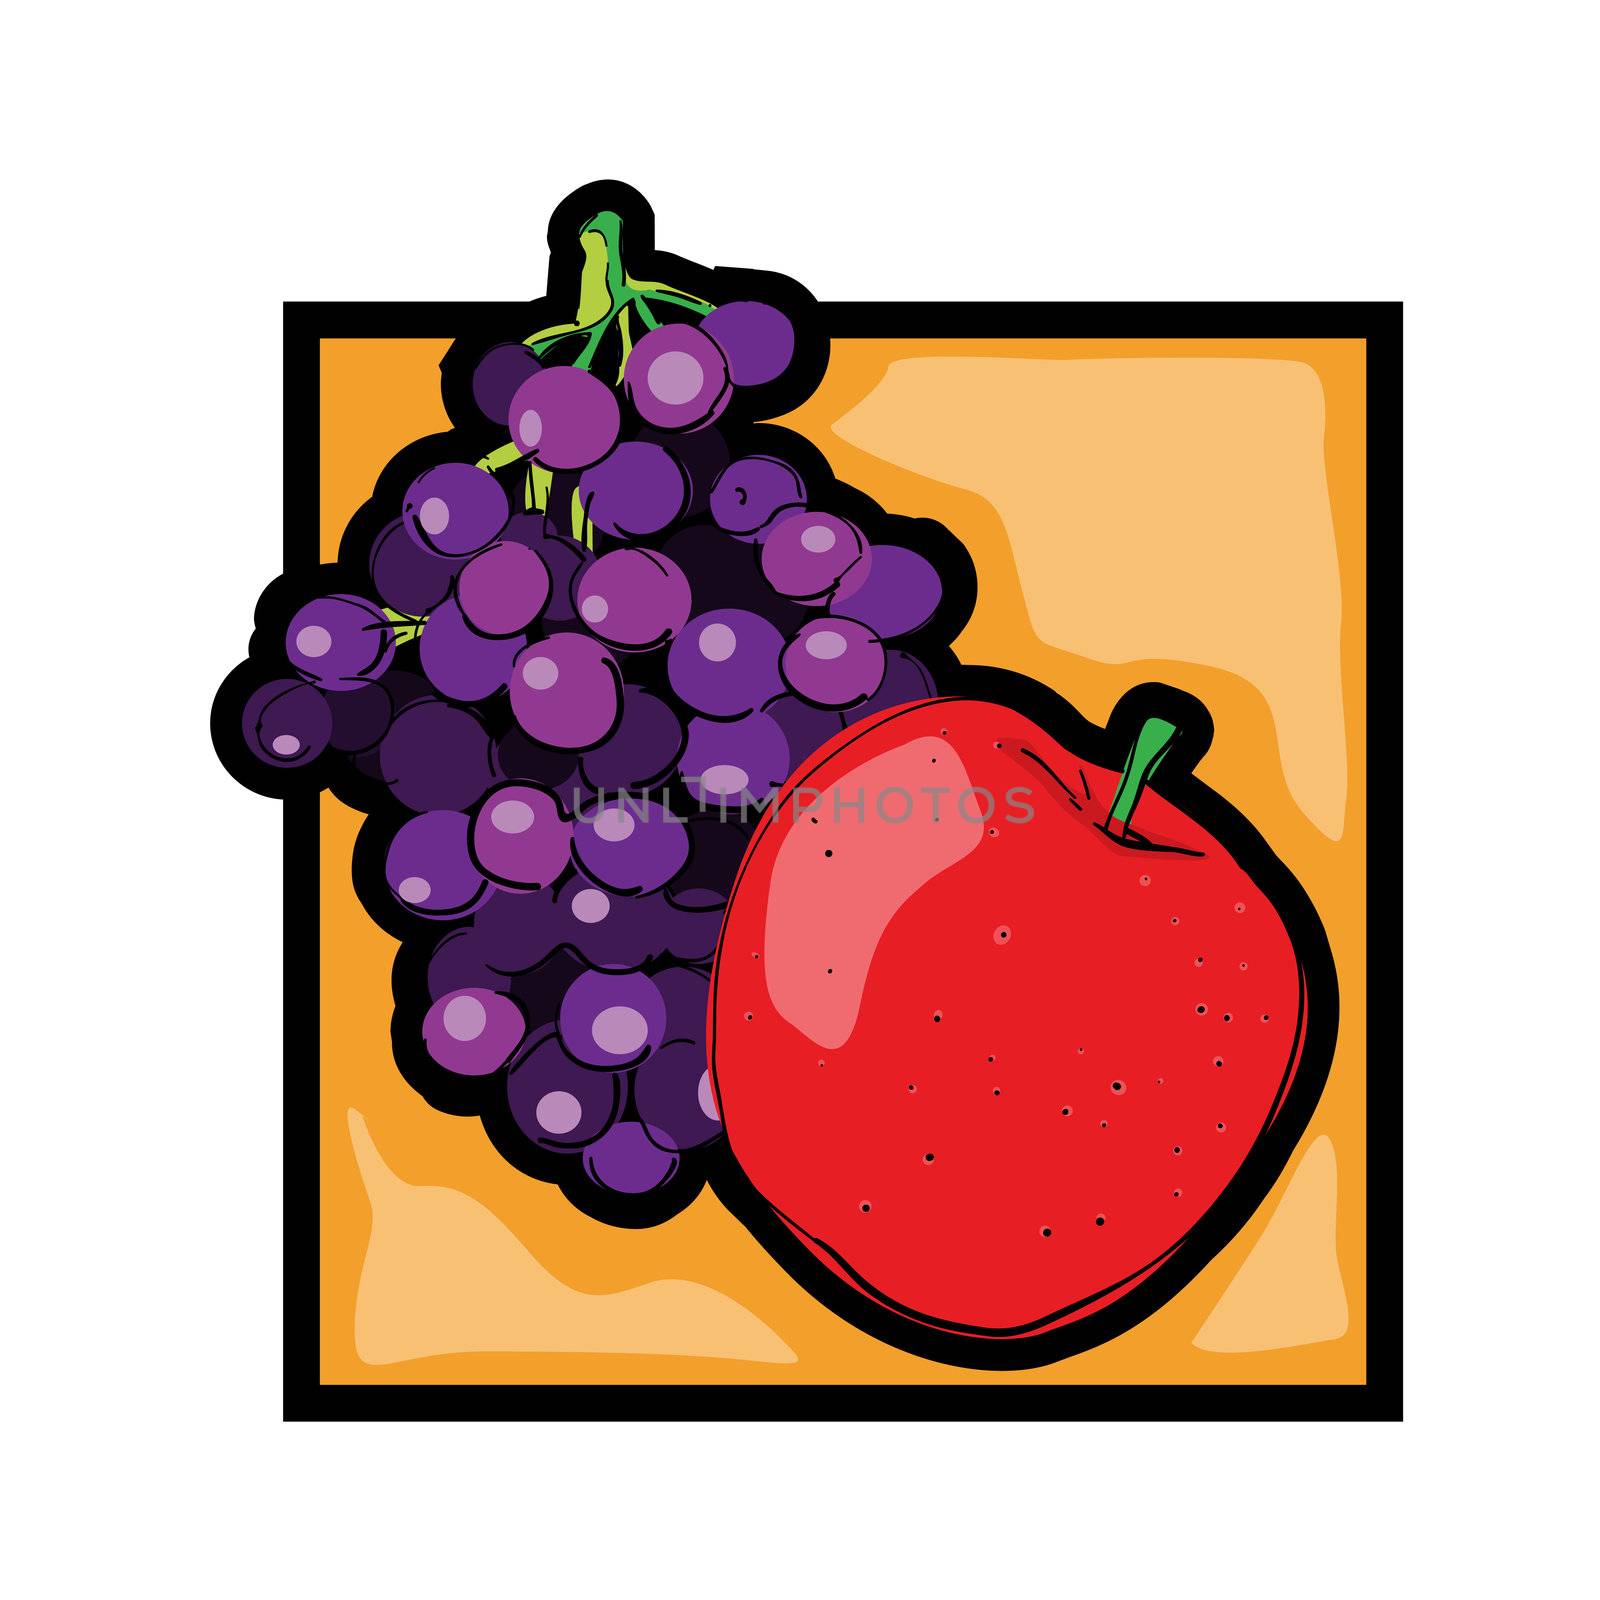 Classic clip art graphic icon with fresh fruits, grapes and apple